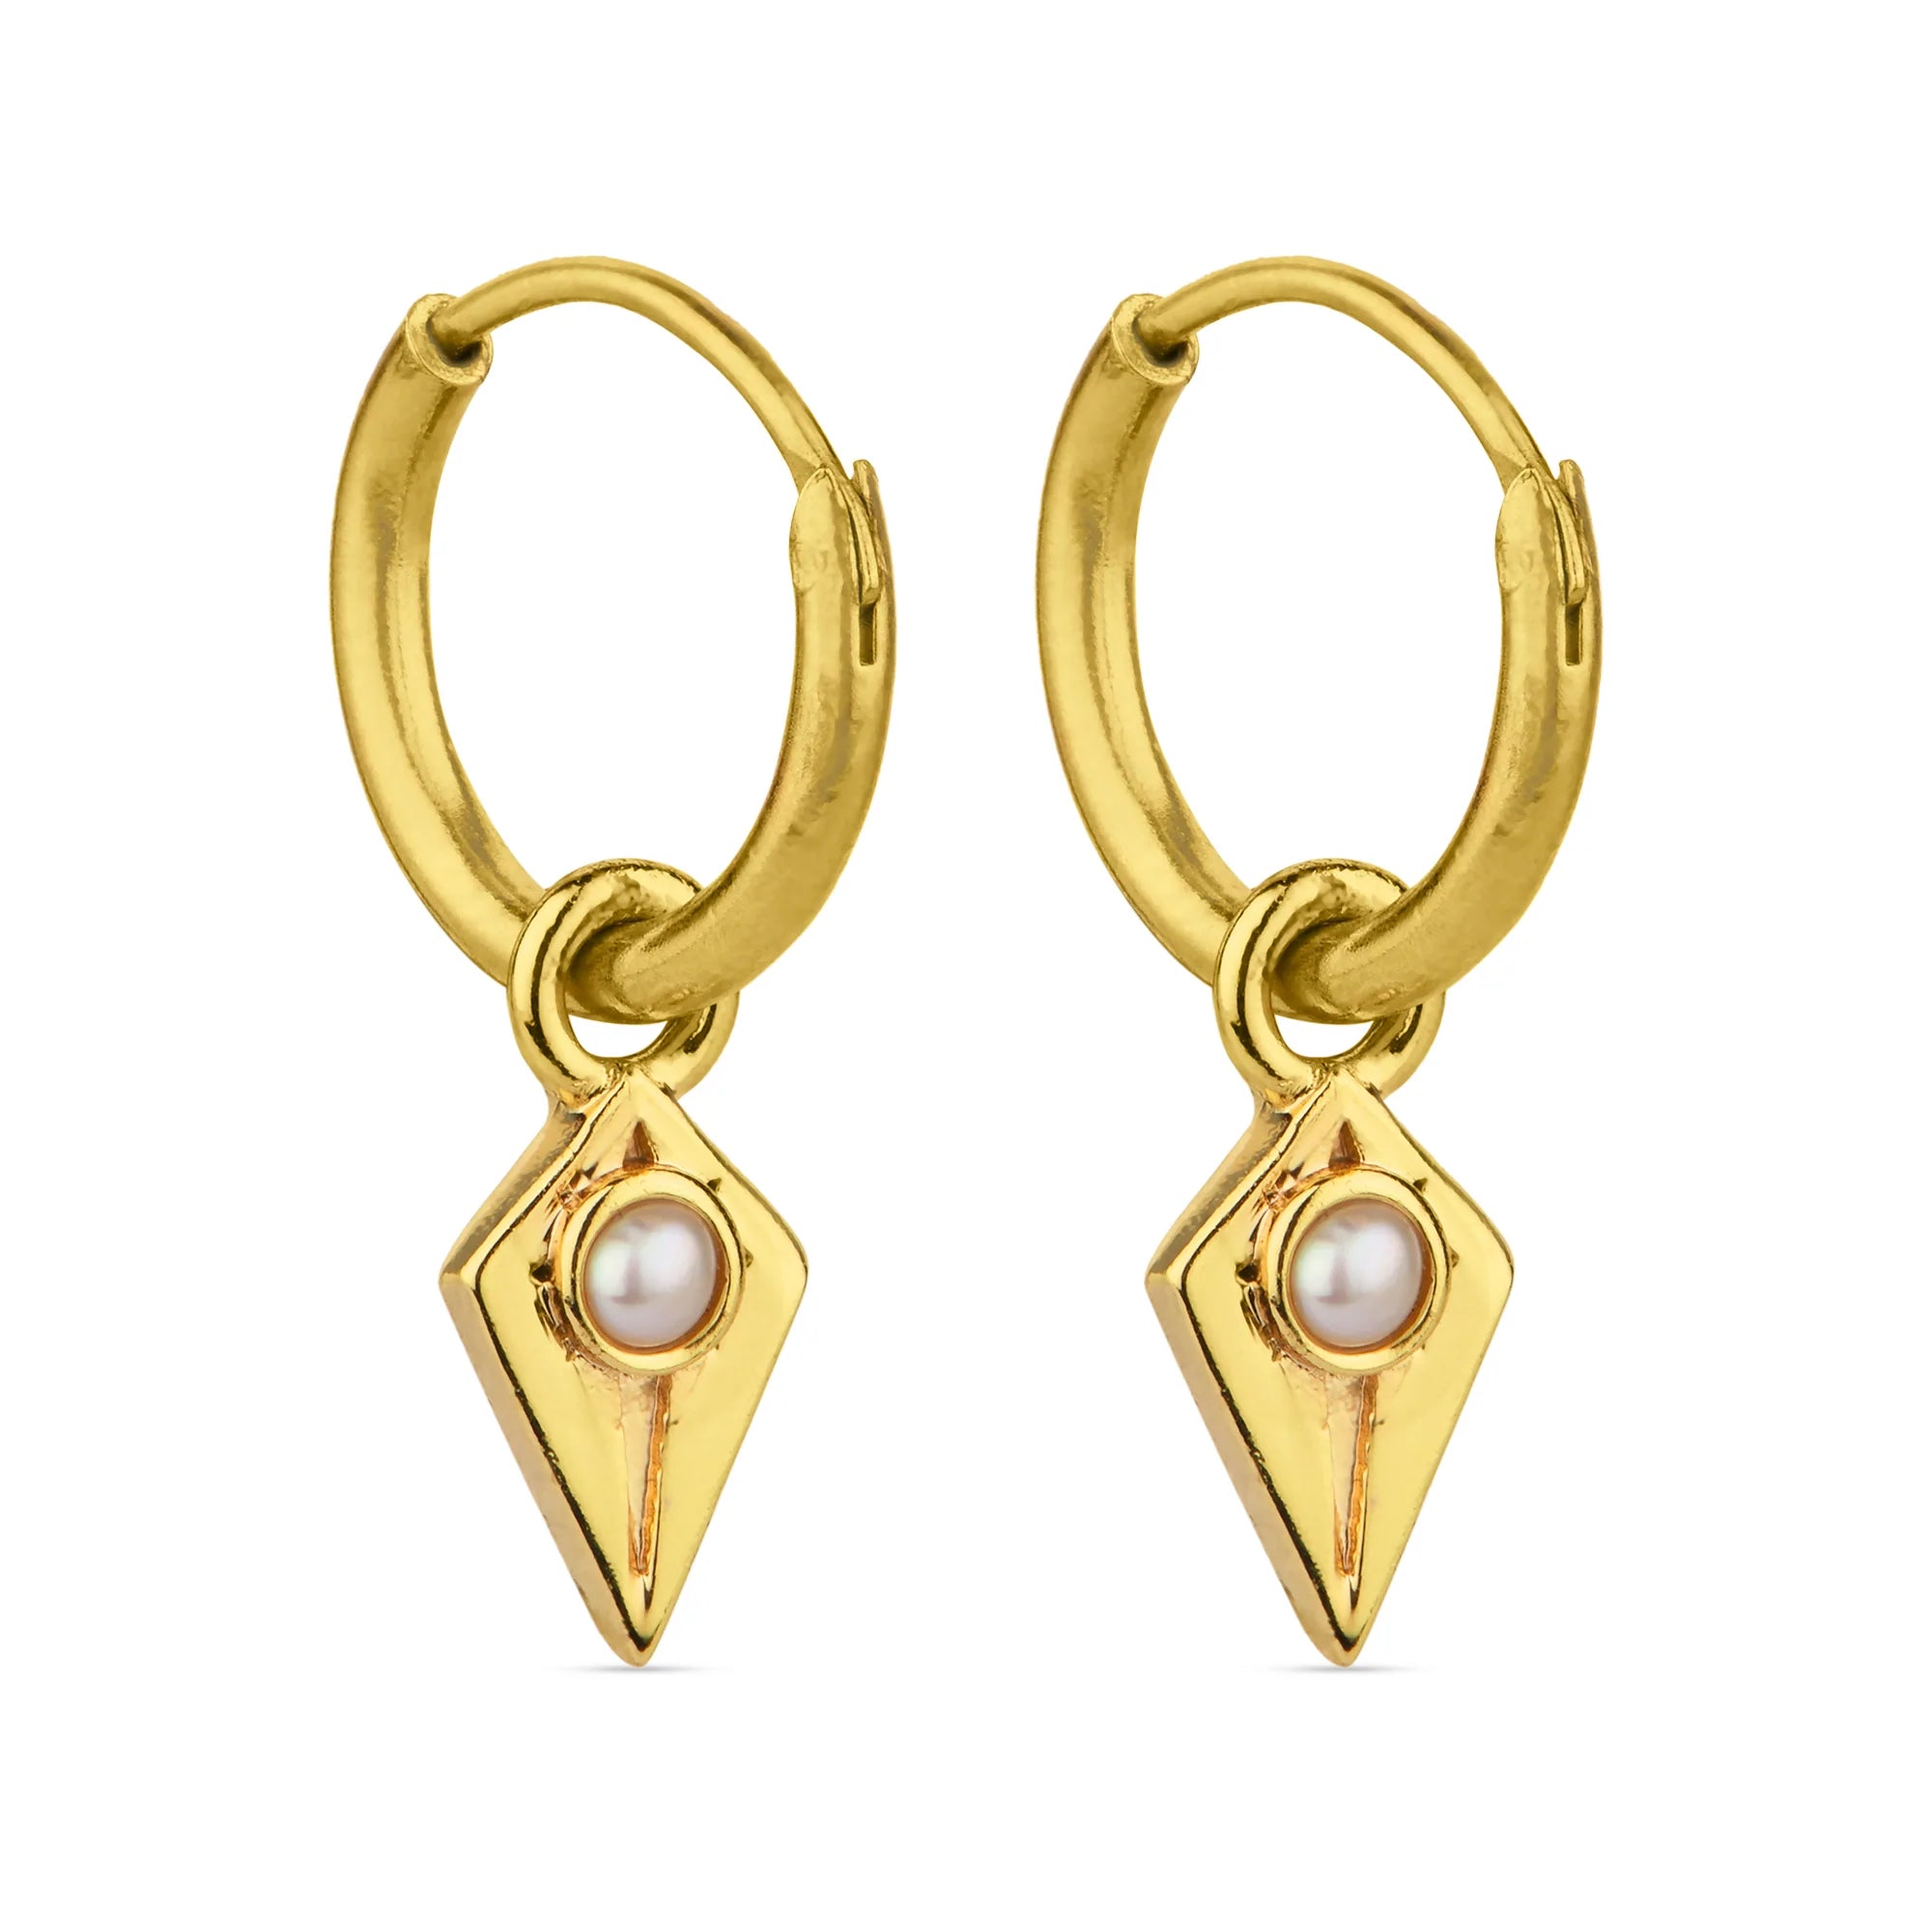 Real Gold Plated Z Pearls Triangle Hoops Earring For Women By Accessorize London